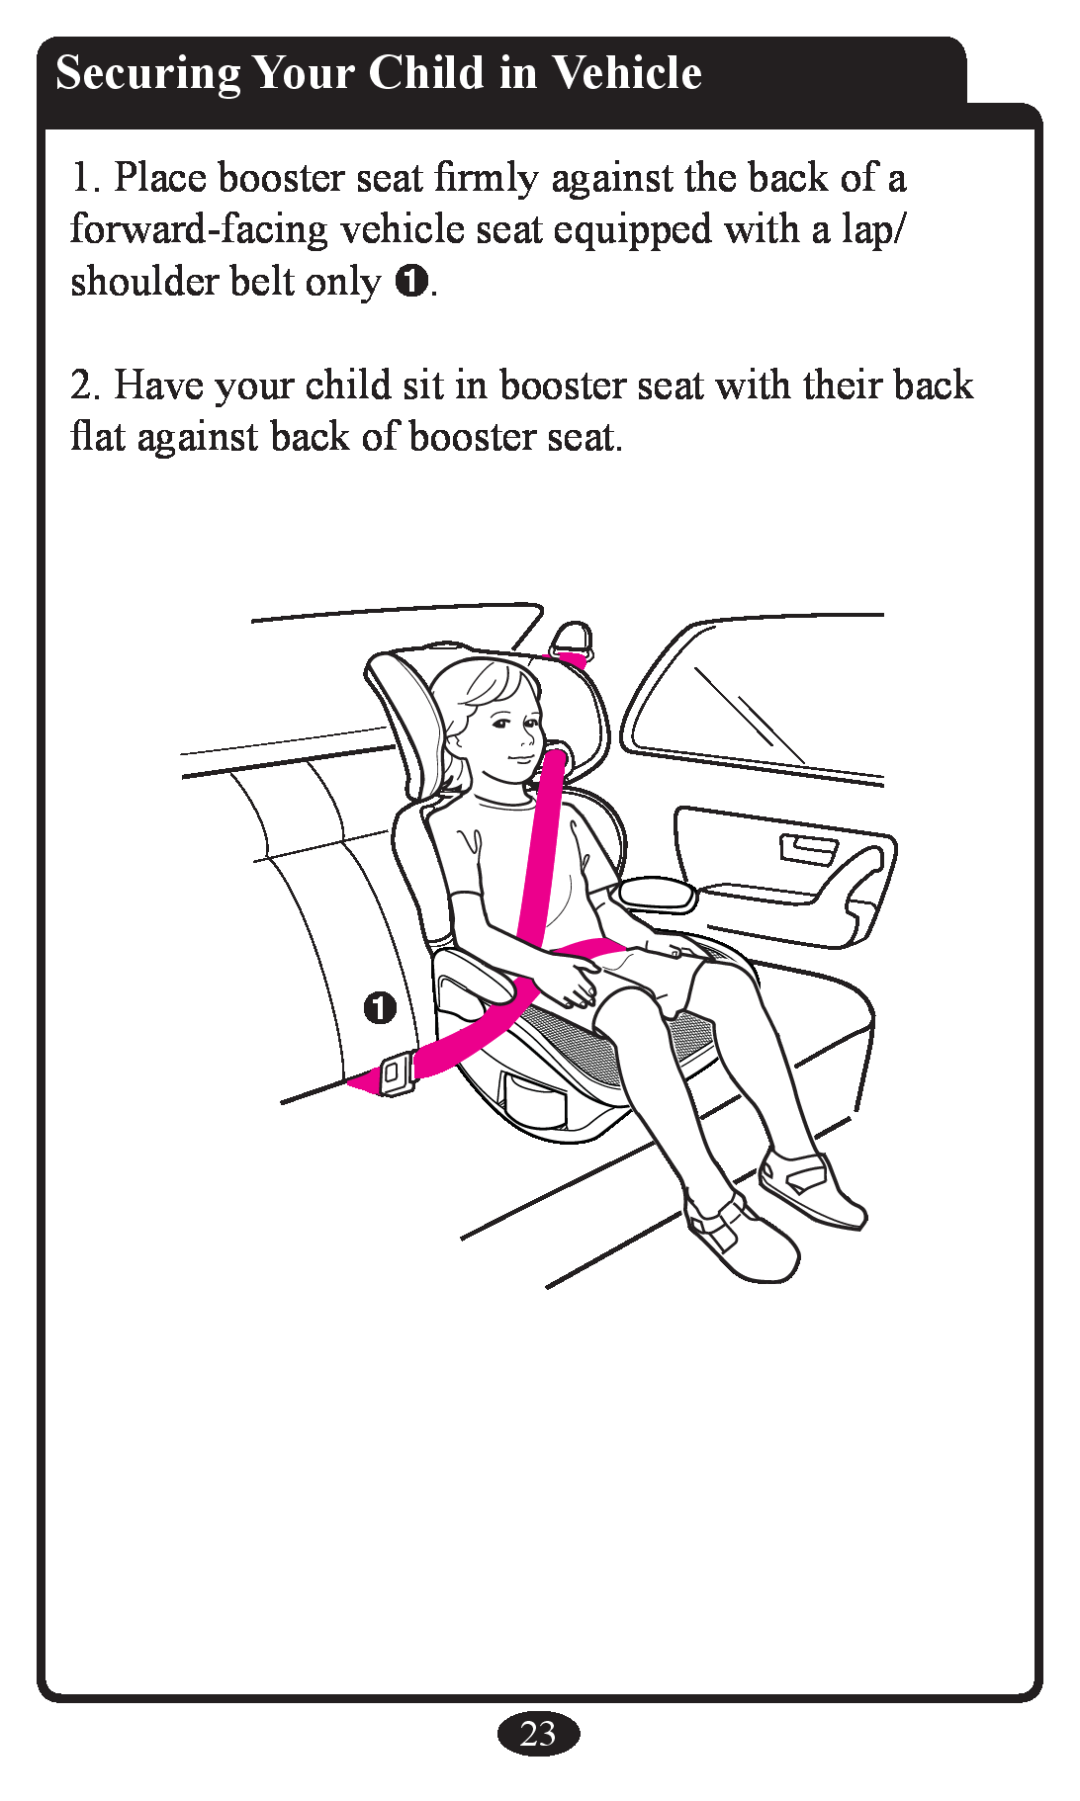 Graco Booster Seat owner manual Securing Your Child in Vehicle 